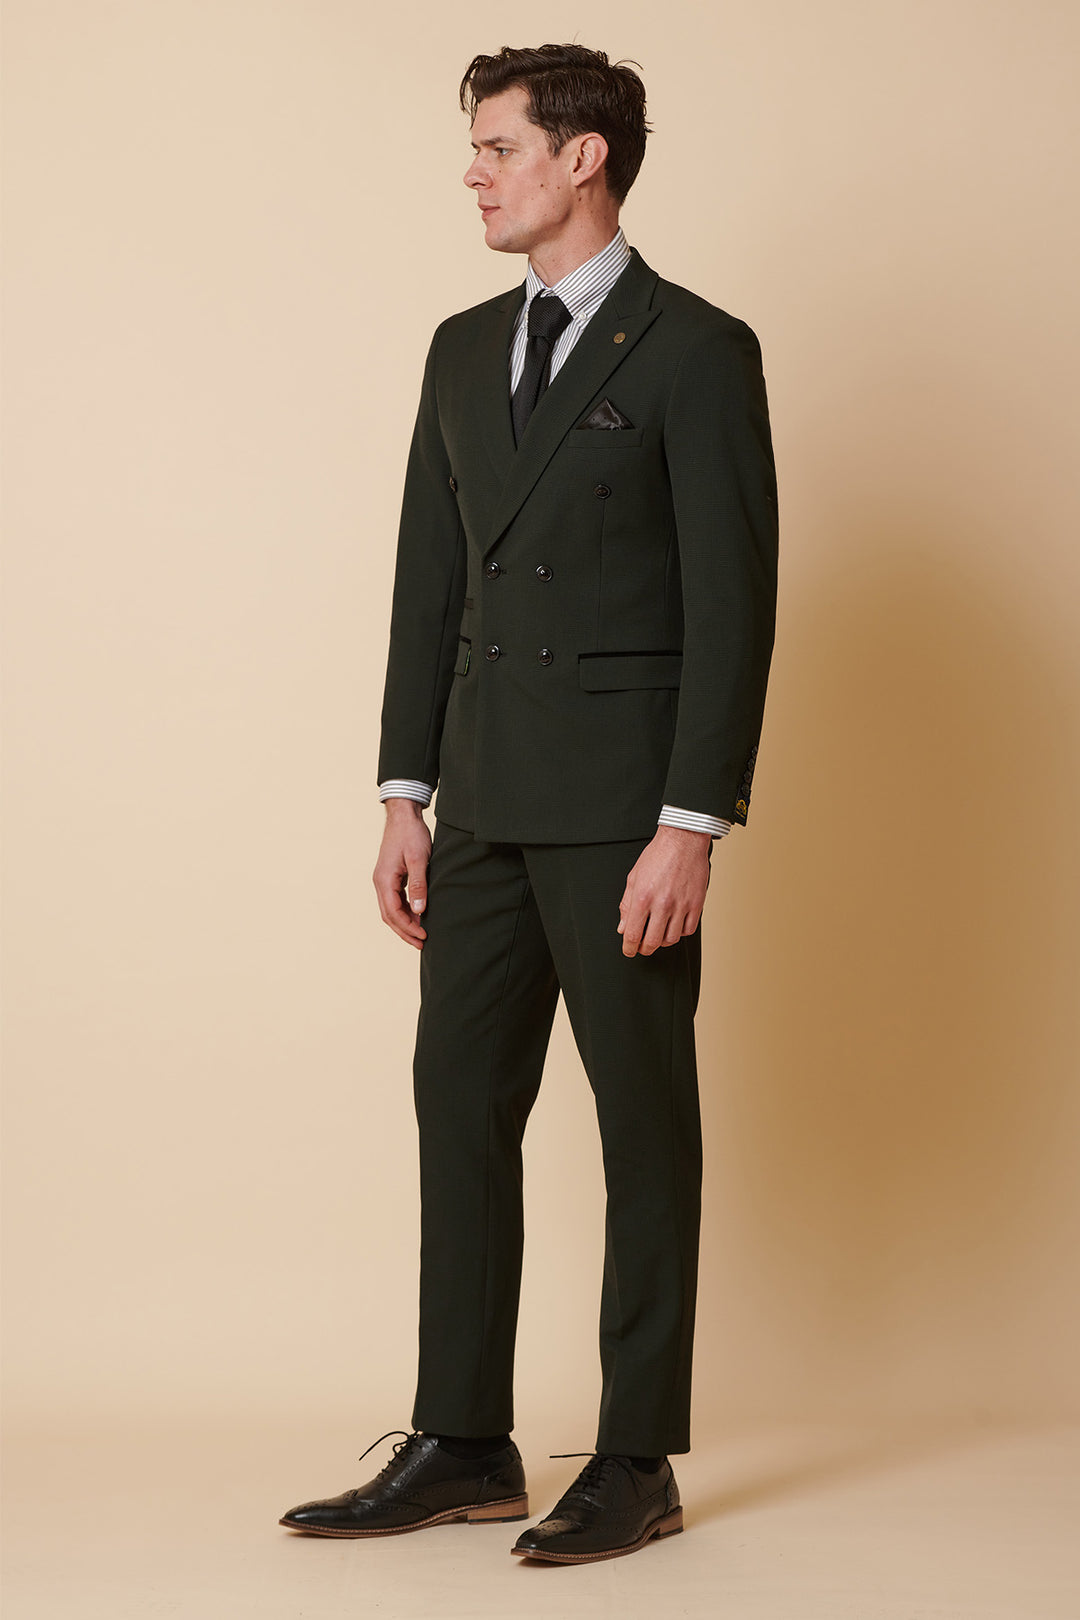 BROMLEY - Olive Green Double Breasted Two Piece Suit